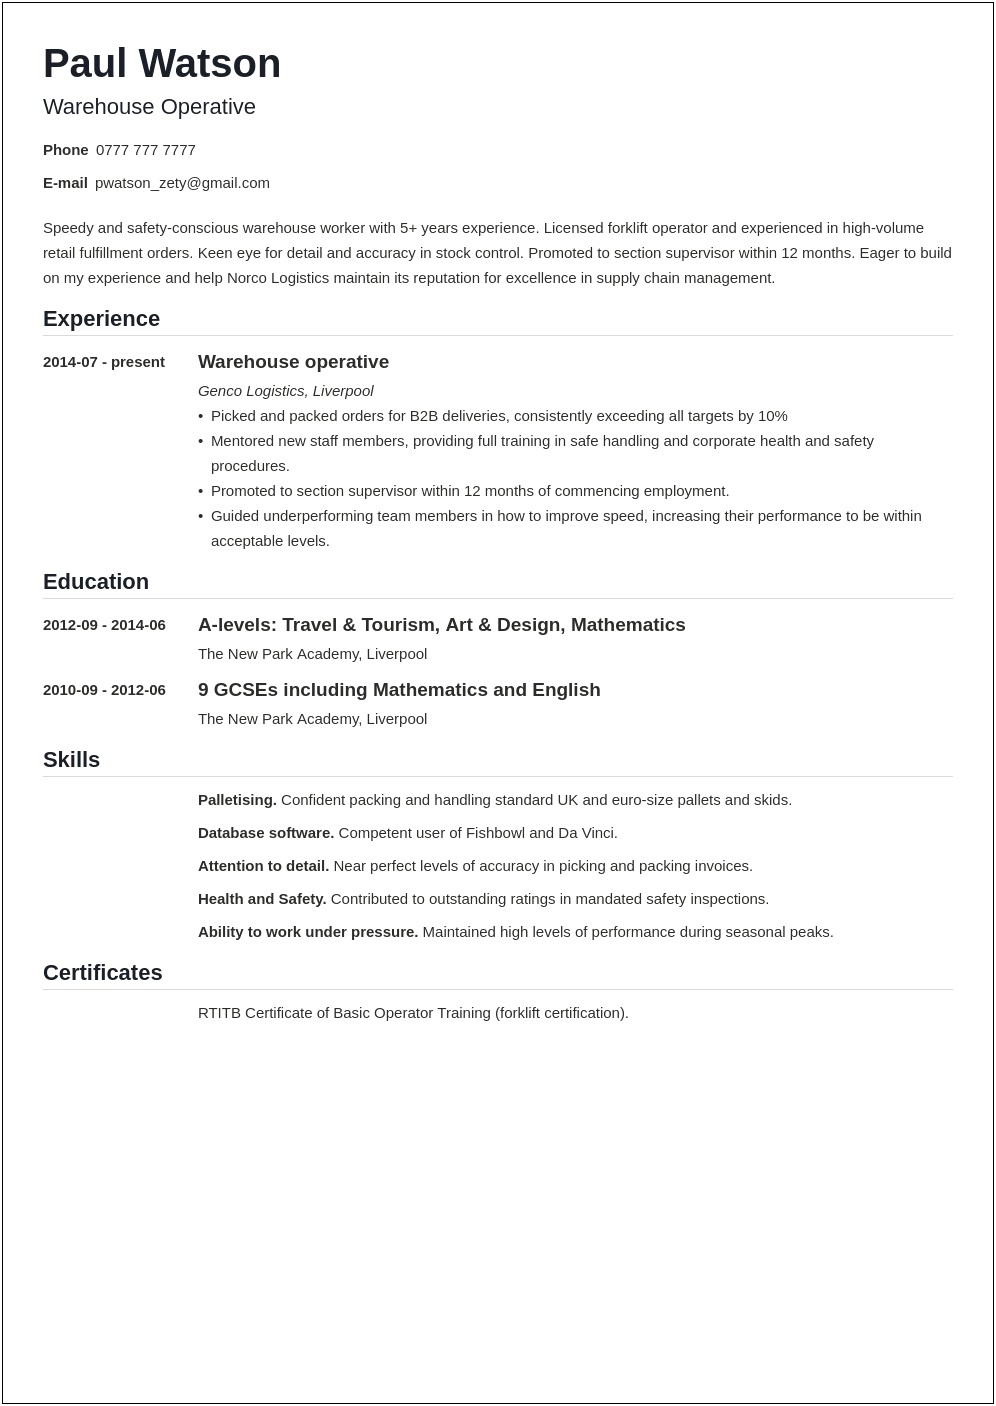 Resume Templates For Warehouse Jobs